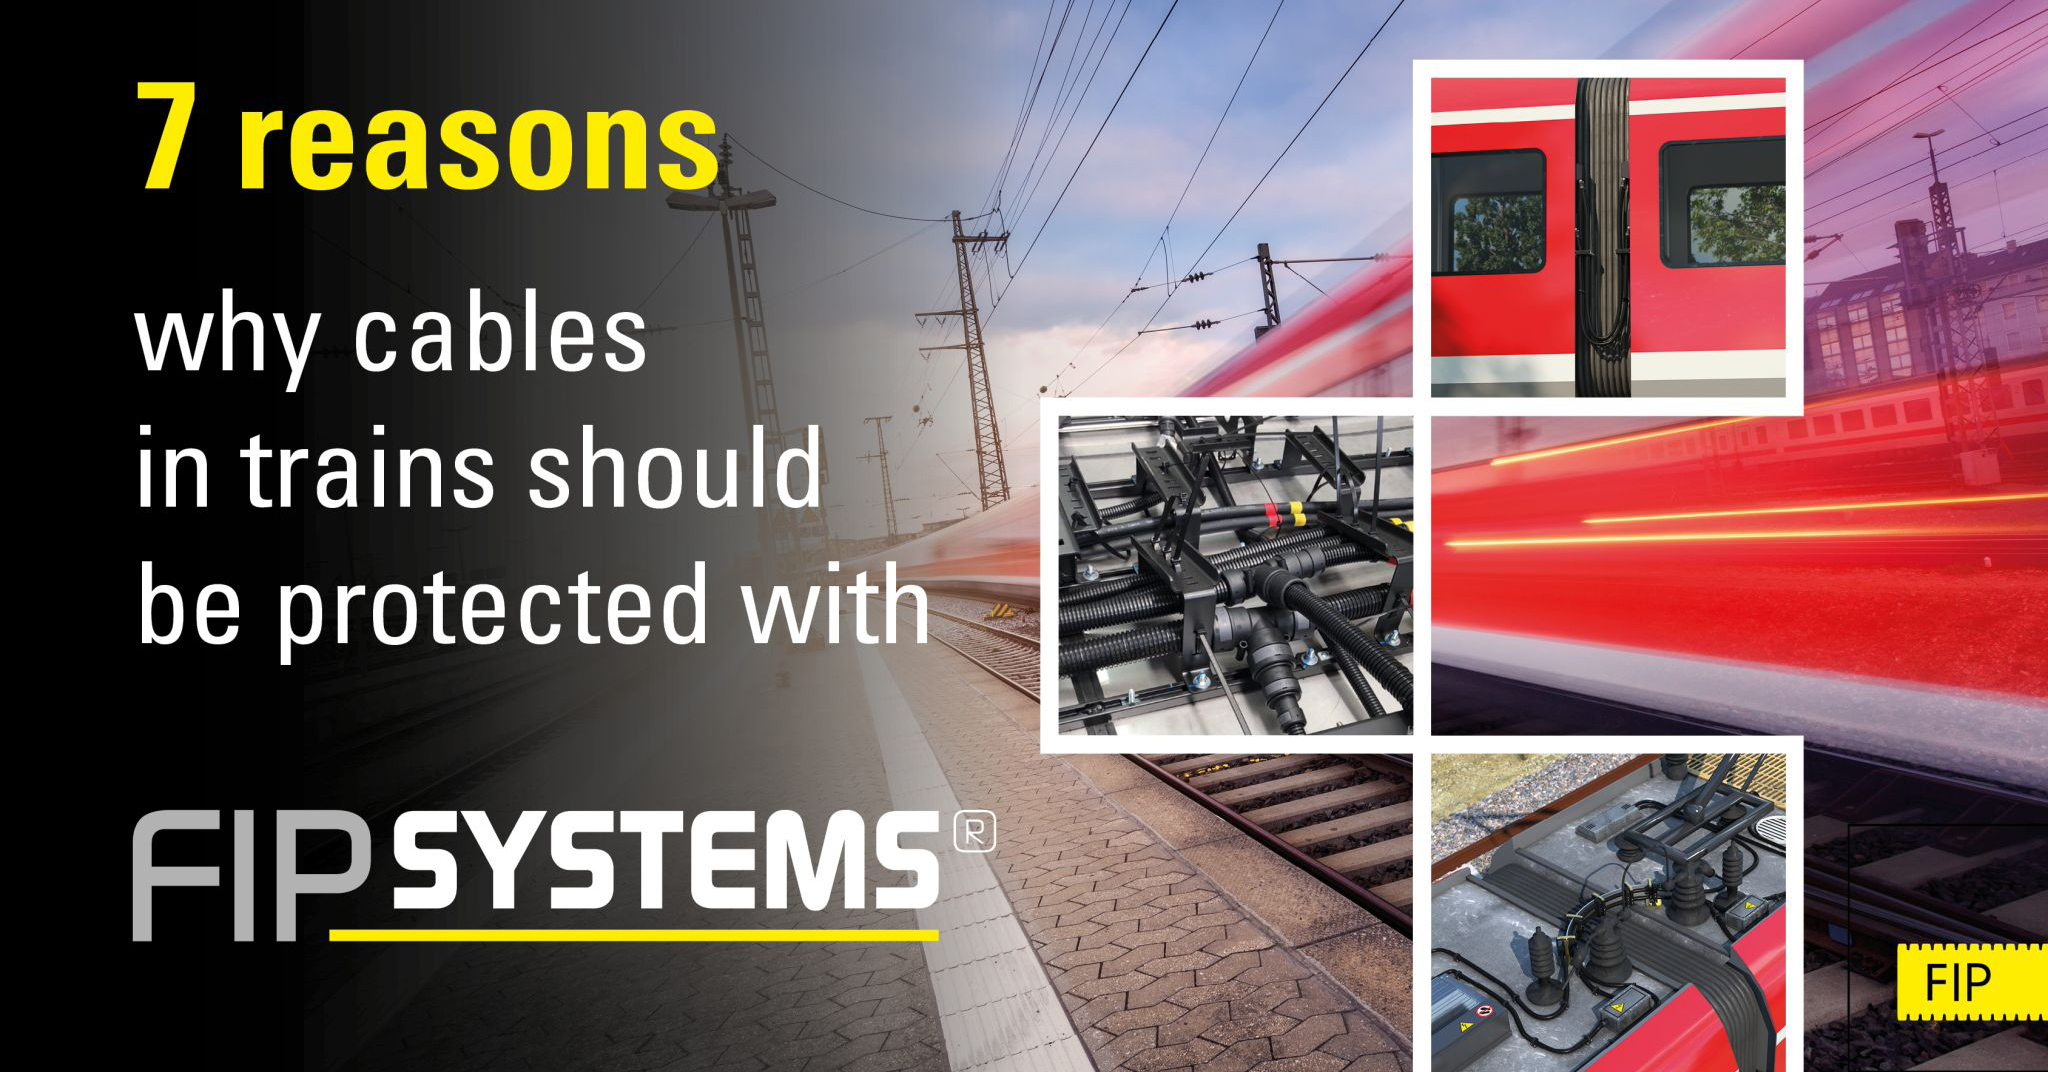 Cable Protection: 7 Reasons why Cables in Trains should be Protected with FIPSYSTEMS